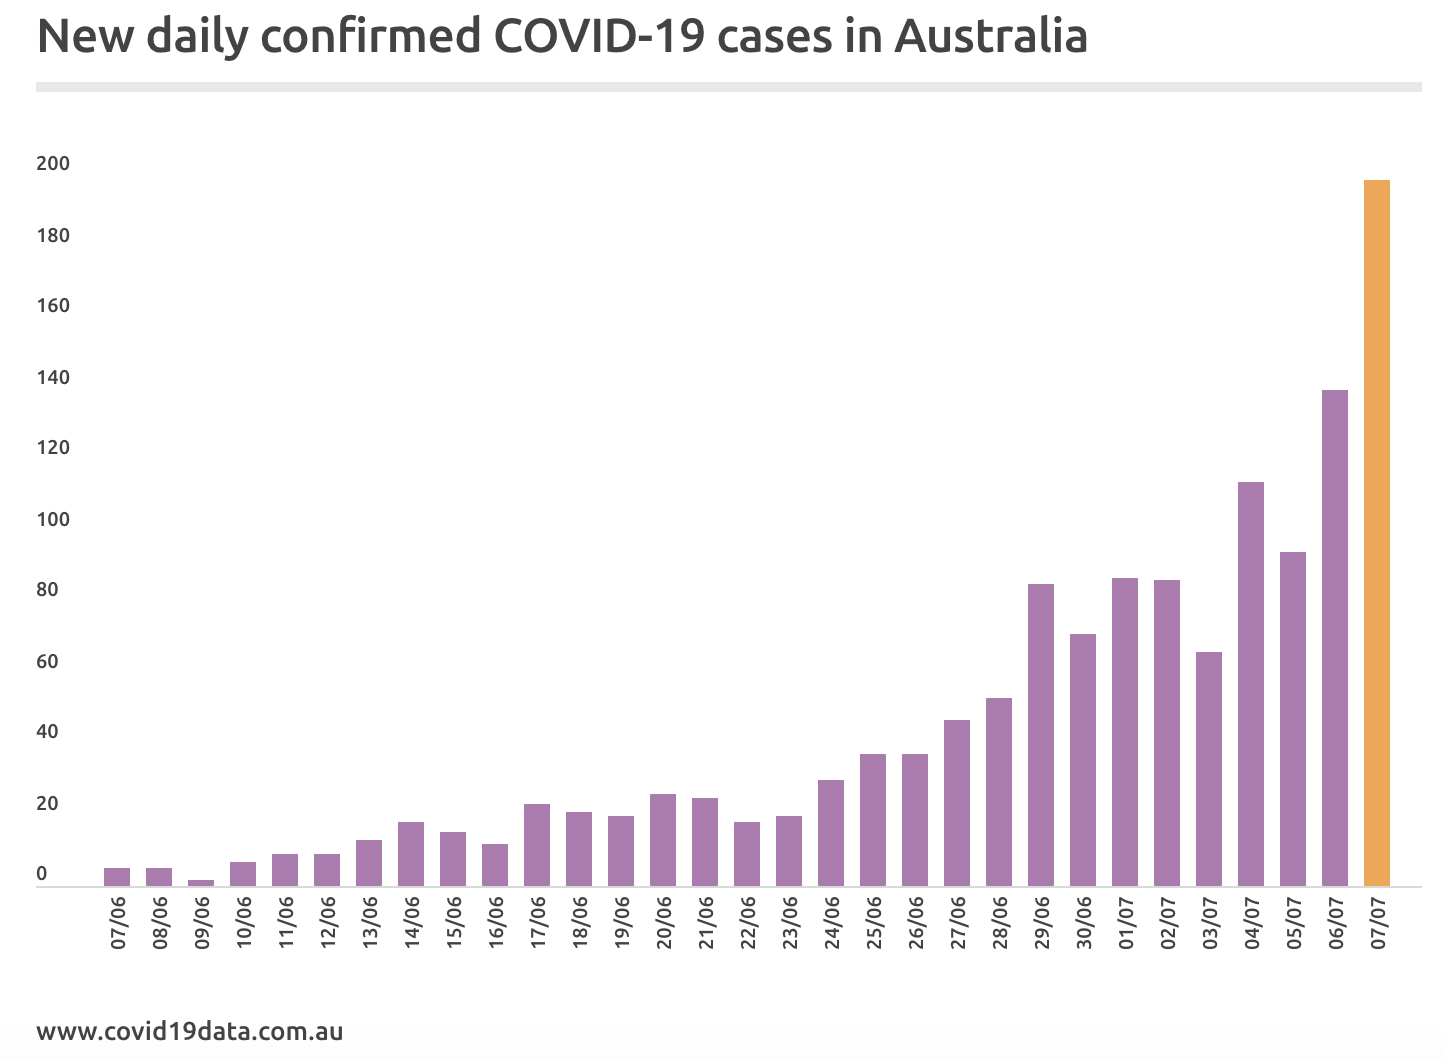 New daily confirmed COVID-19 cases in Australia